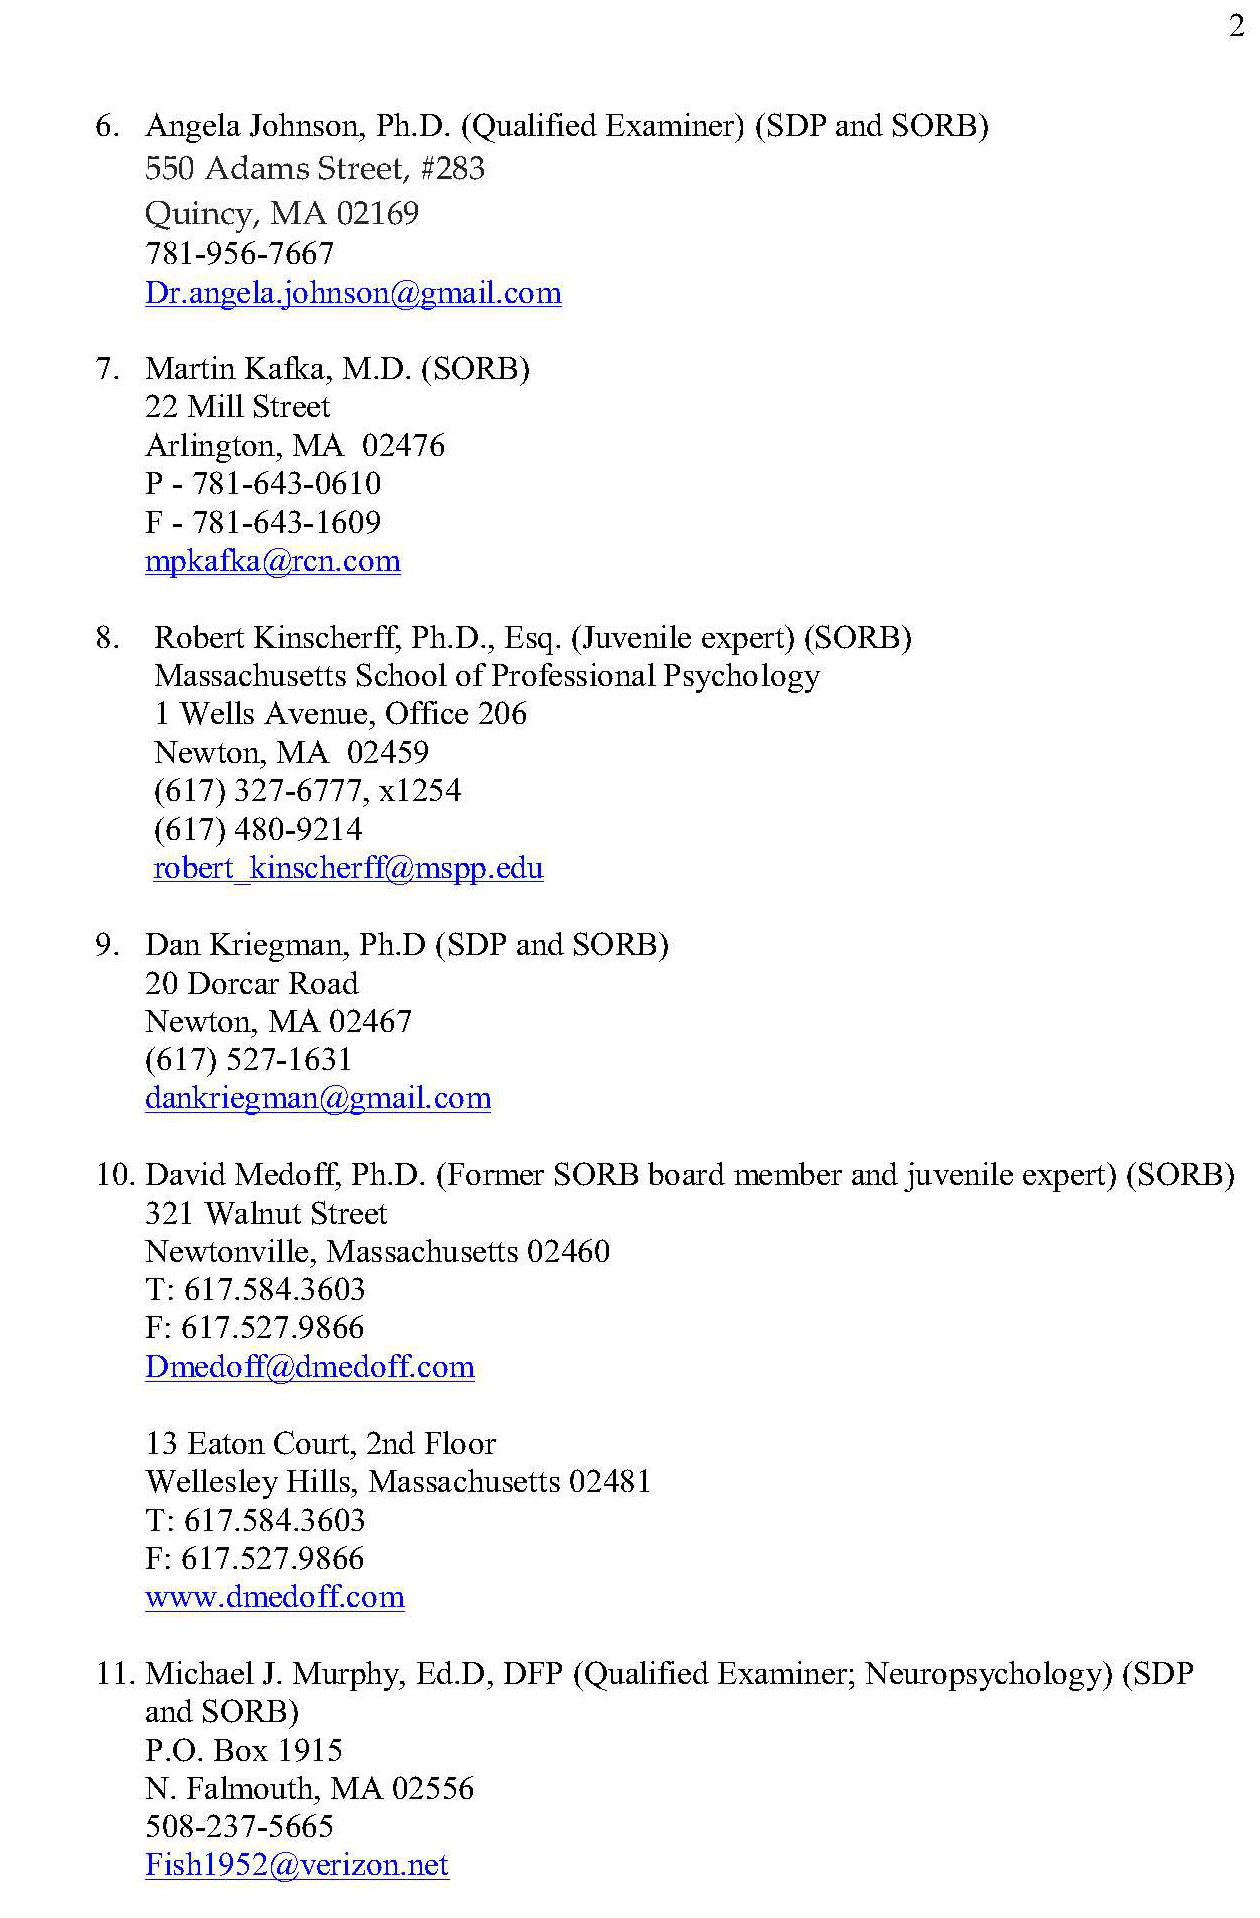 List of Sex Offender Risk Evaluation Experts.Updated Oct. 2014_4